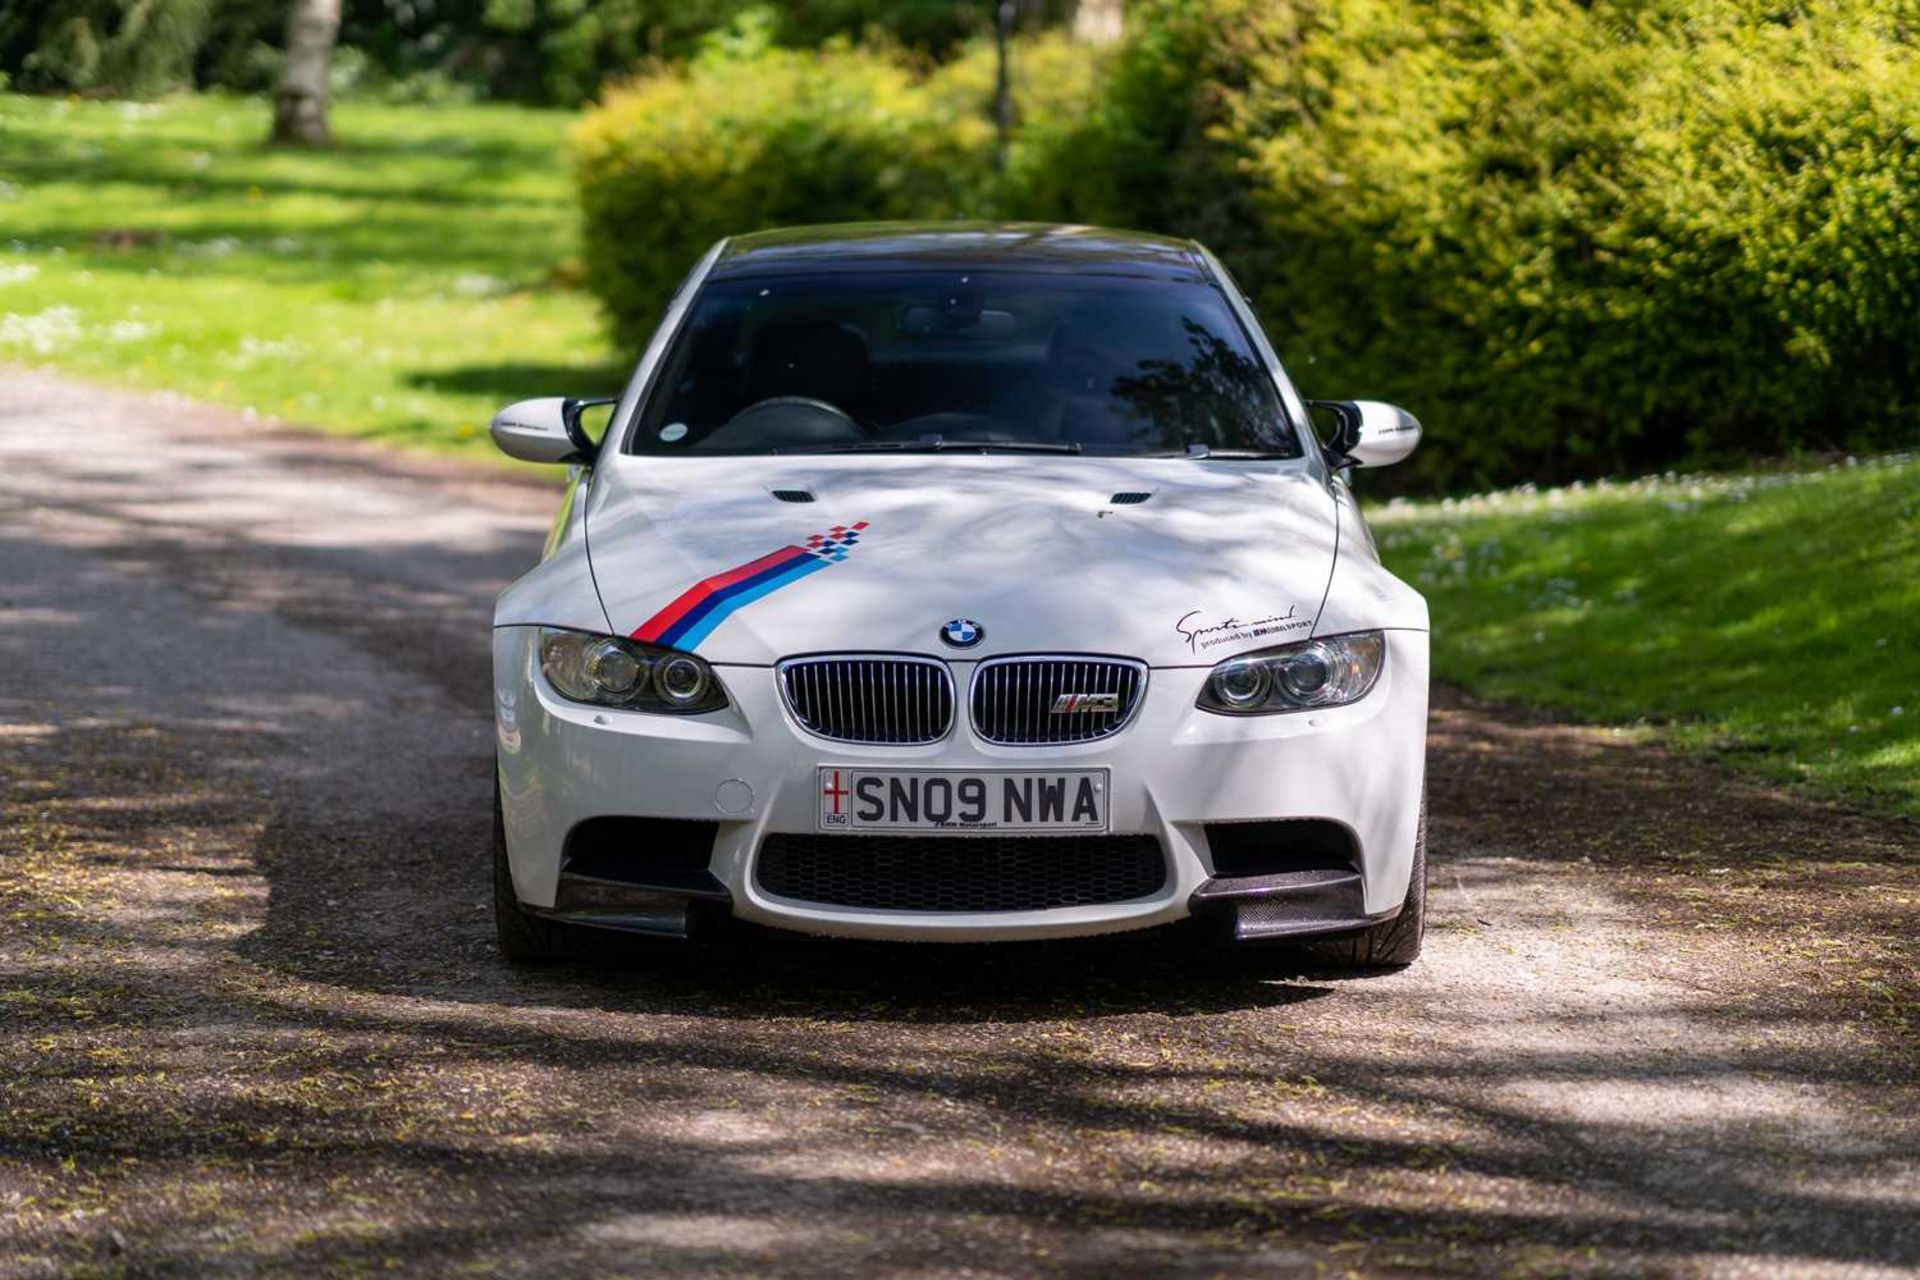 2009 BMW E92 M3  Sought after manual gearbox - Image 2 of 65